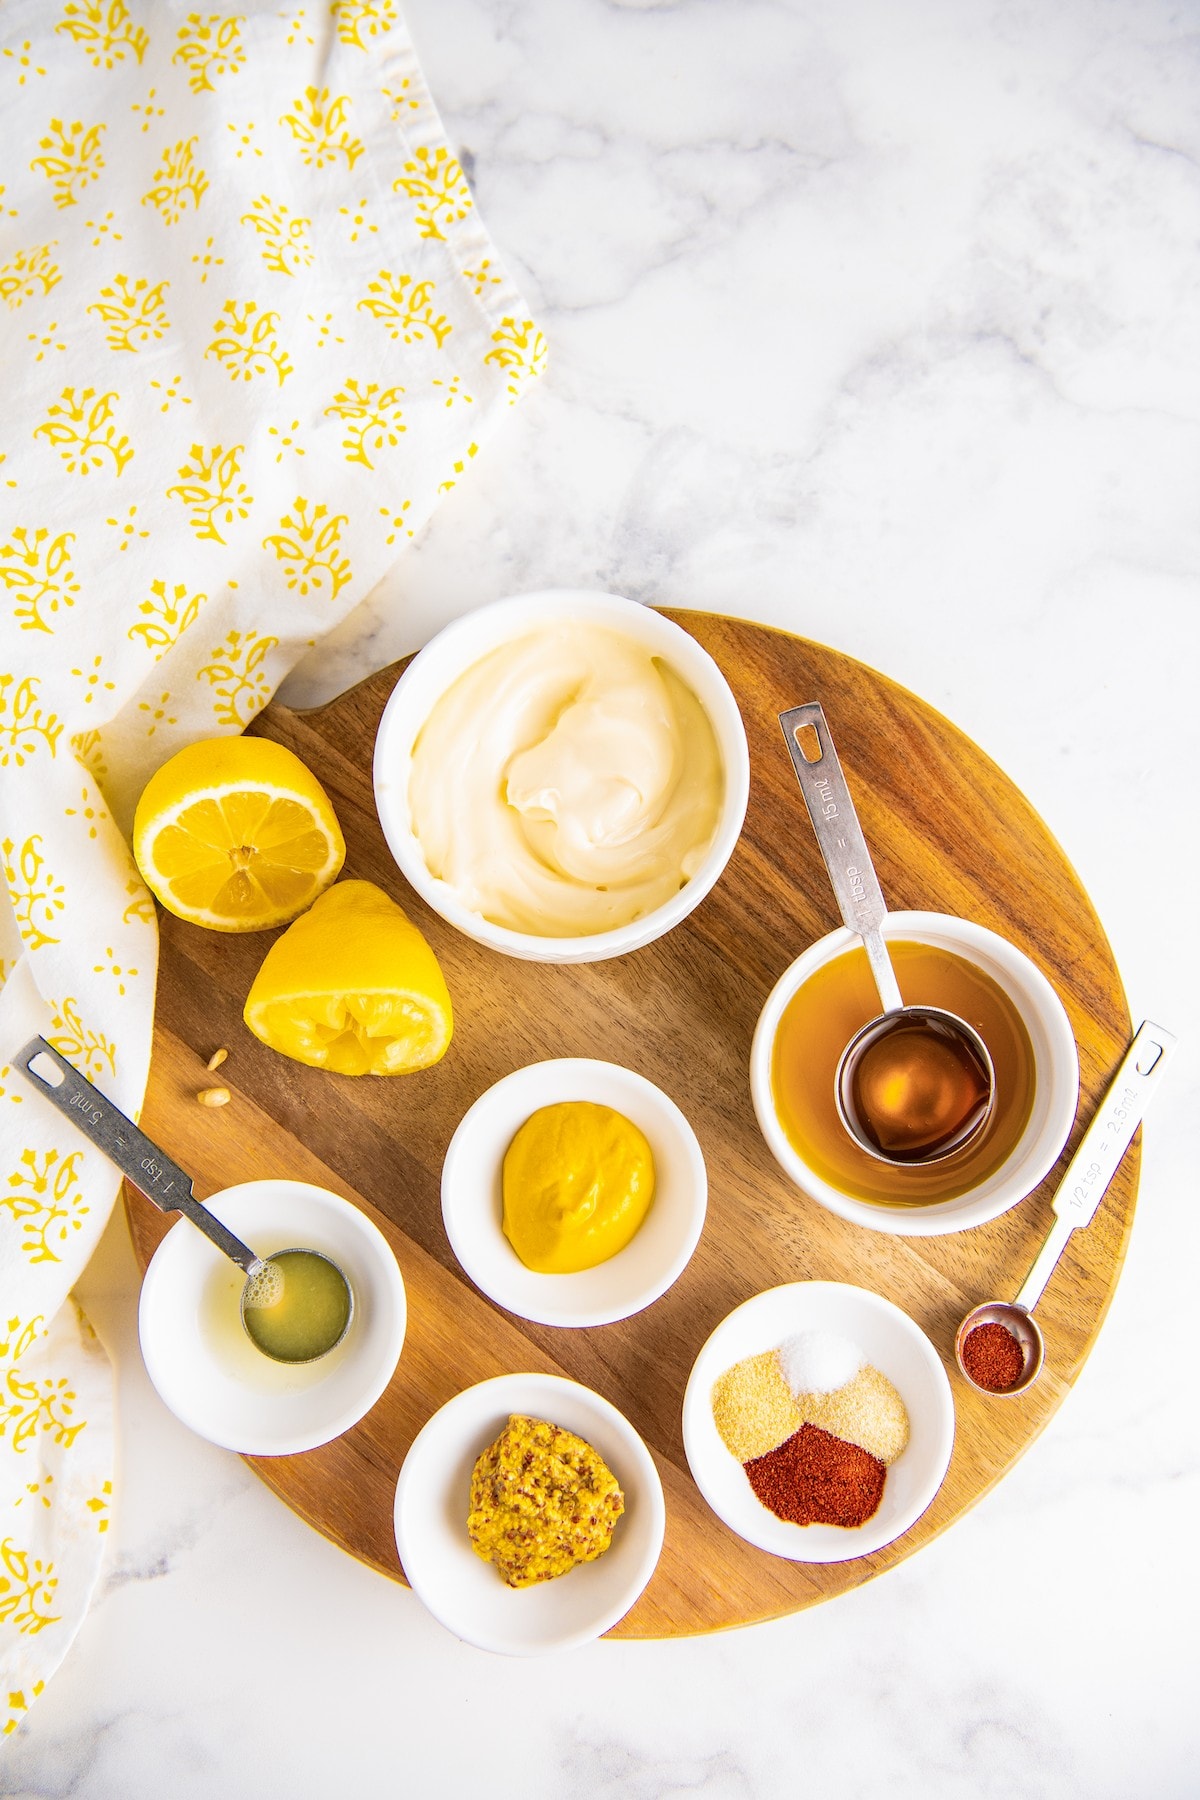 Overhead view of the ingredients needed for this honey mustard recipe, on a cutting board: a bowl of mayo, a lemon cut in half, a bowl of Dijon mustard, a bowl of yellow mustard, a bowl of lemon juice with a measuring spoon in it, a bowl of honey with a measuring spoon in it, a bowl of salt, onion powder, garlic powder, and paprika, and a measuring spoon with cayenne